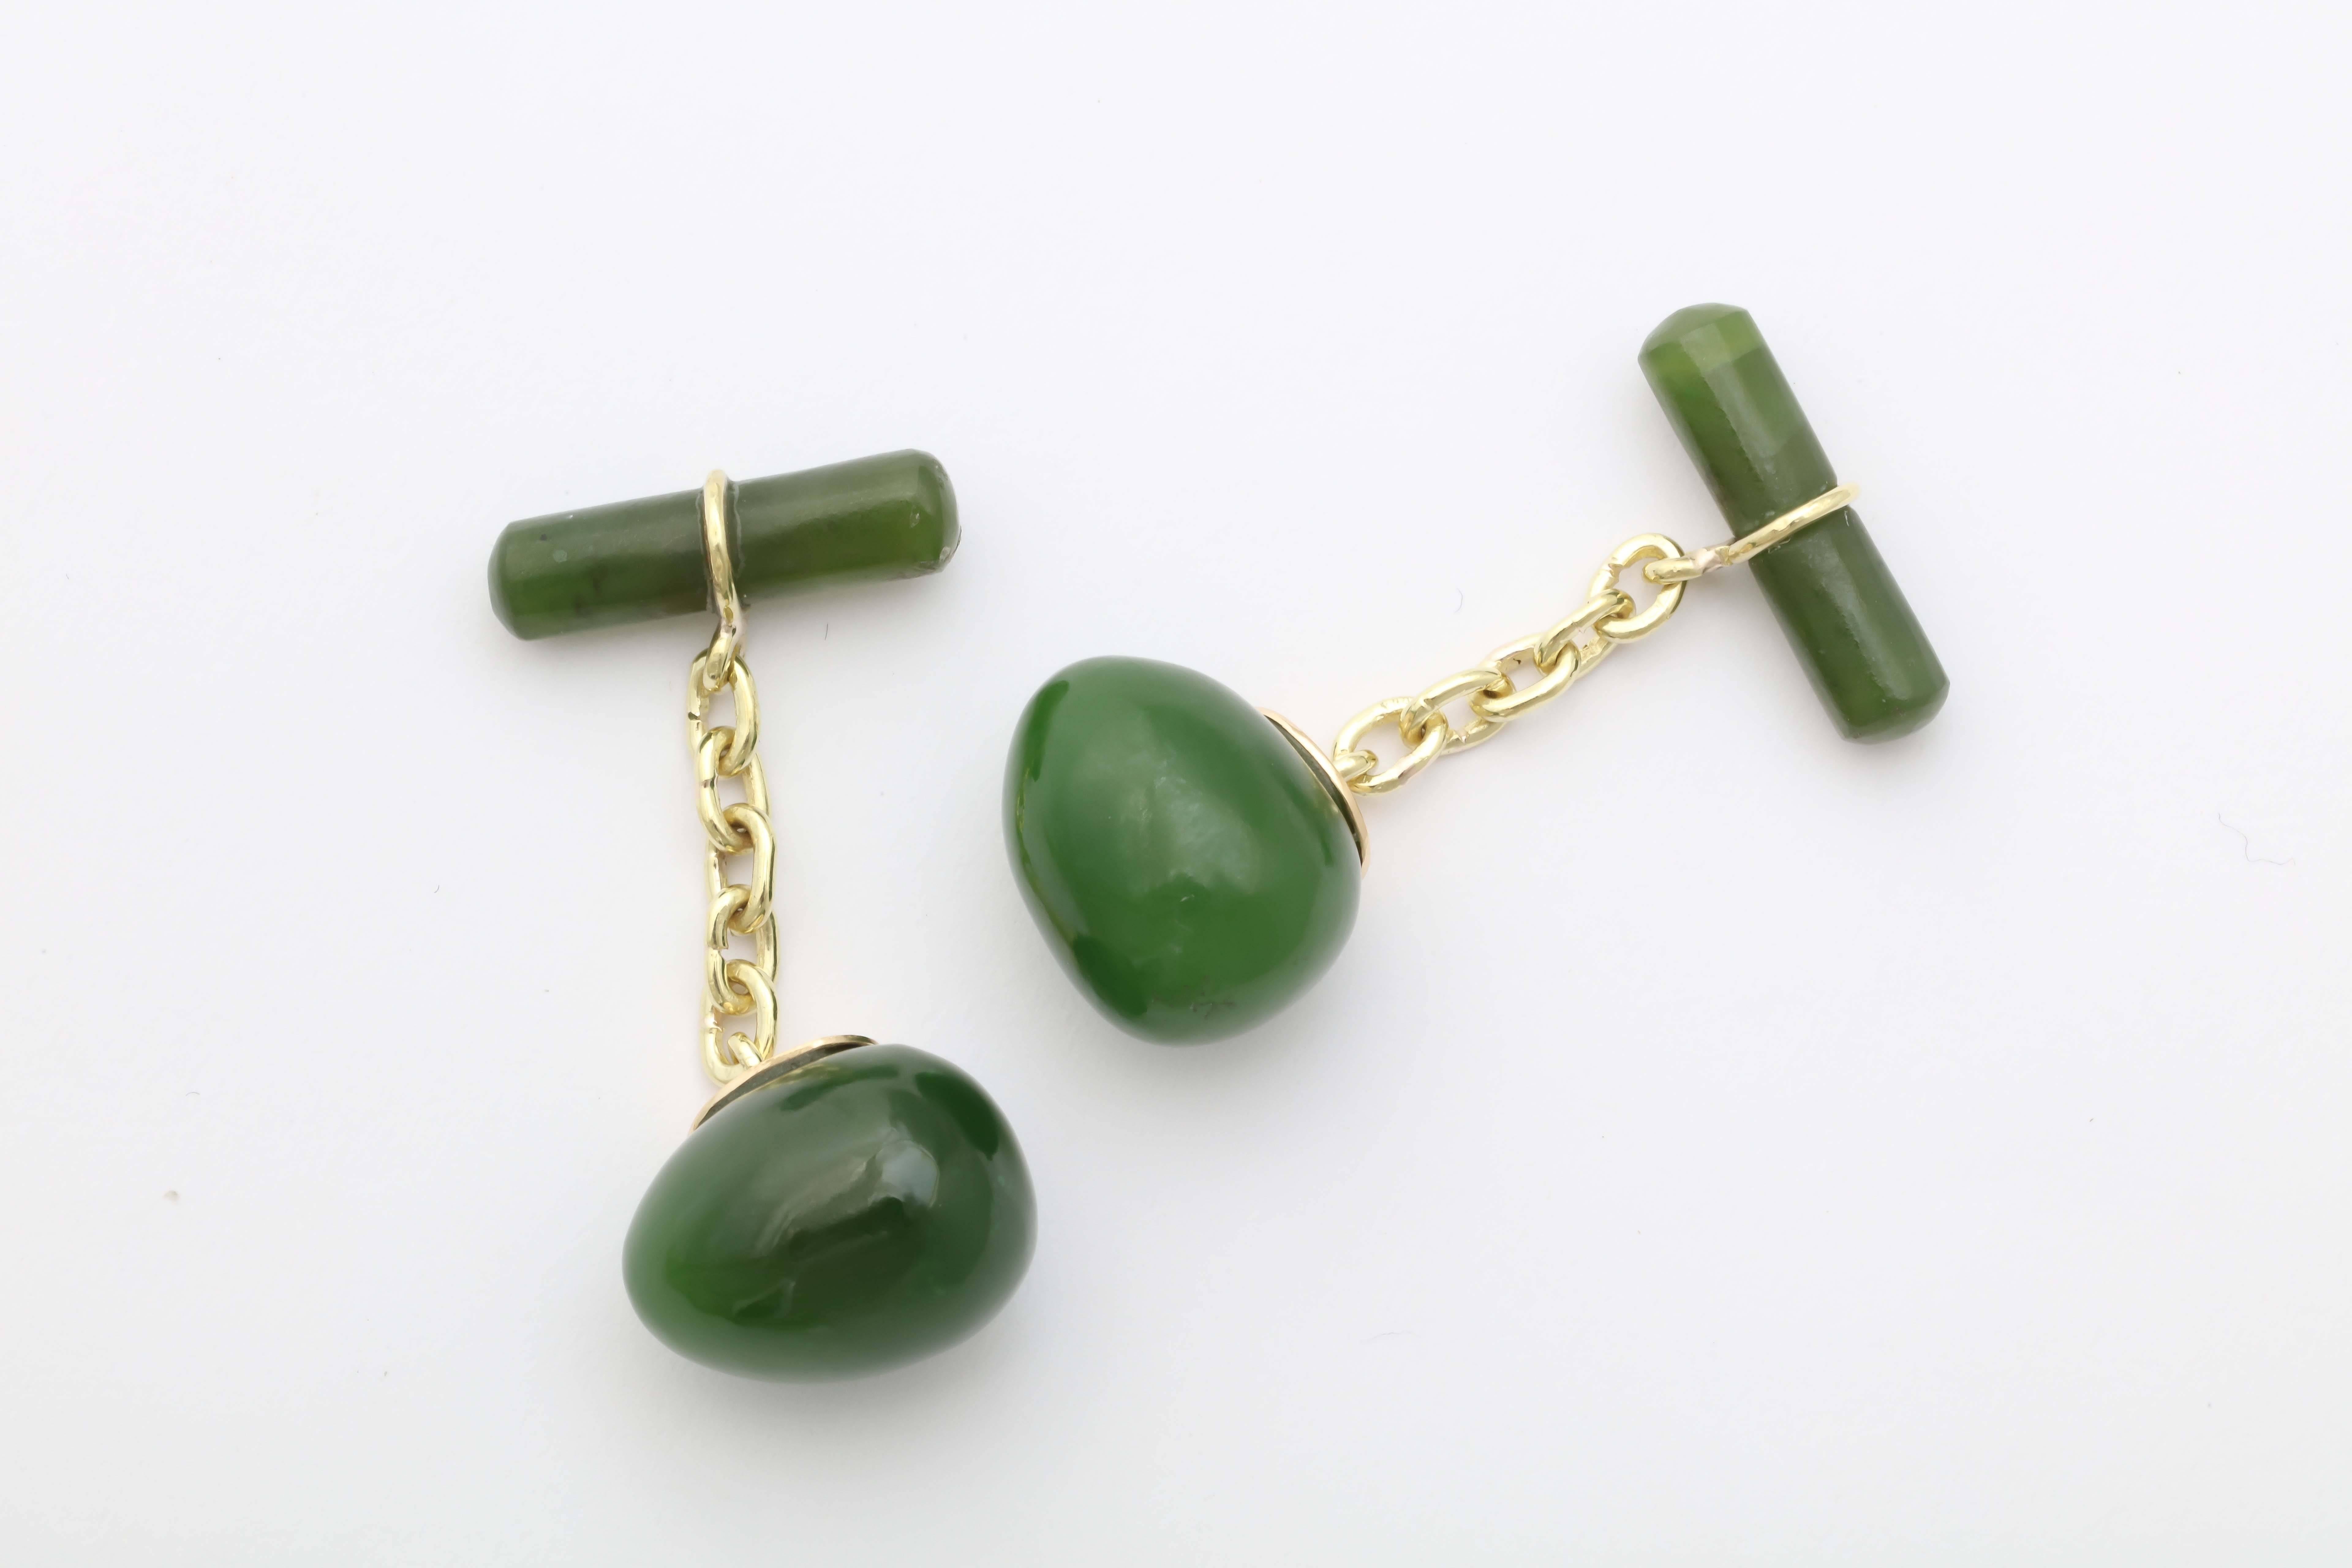 A pair of hand-carved egg-shaped nephrite cufflinks based on a Russian design from 1880 by the Fabergé workmaster, Erik Kollin. The well-matched nephrite links recall the finest Siberian specimens of the 19th century. Each egg is attached to an